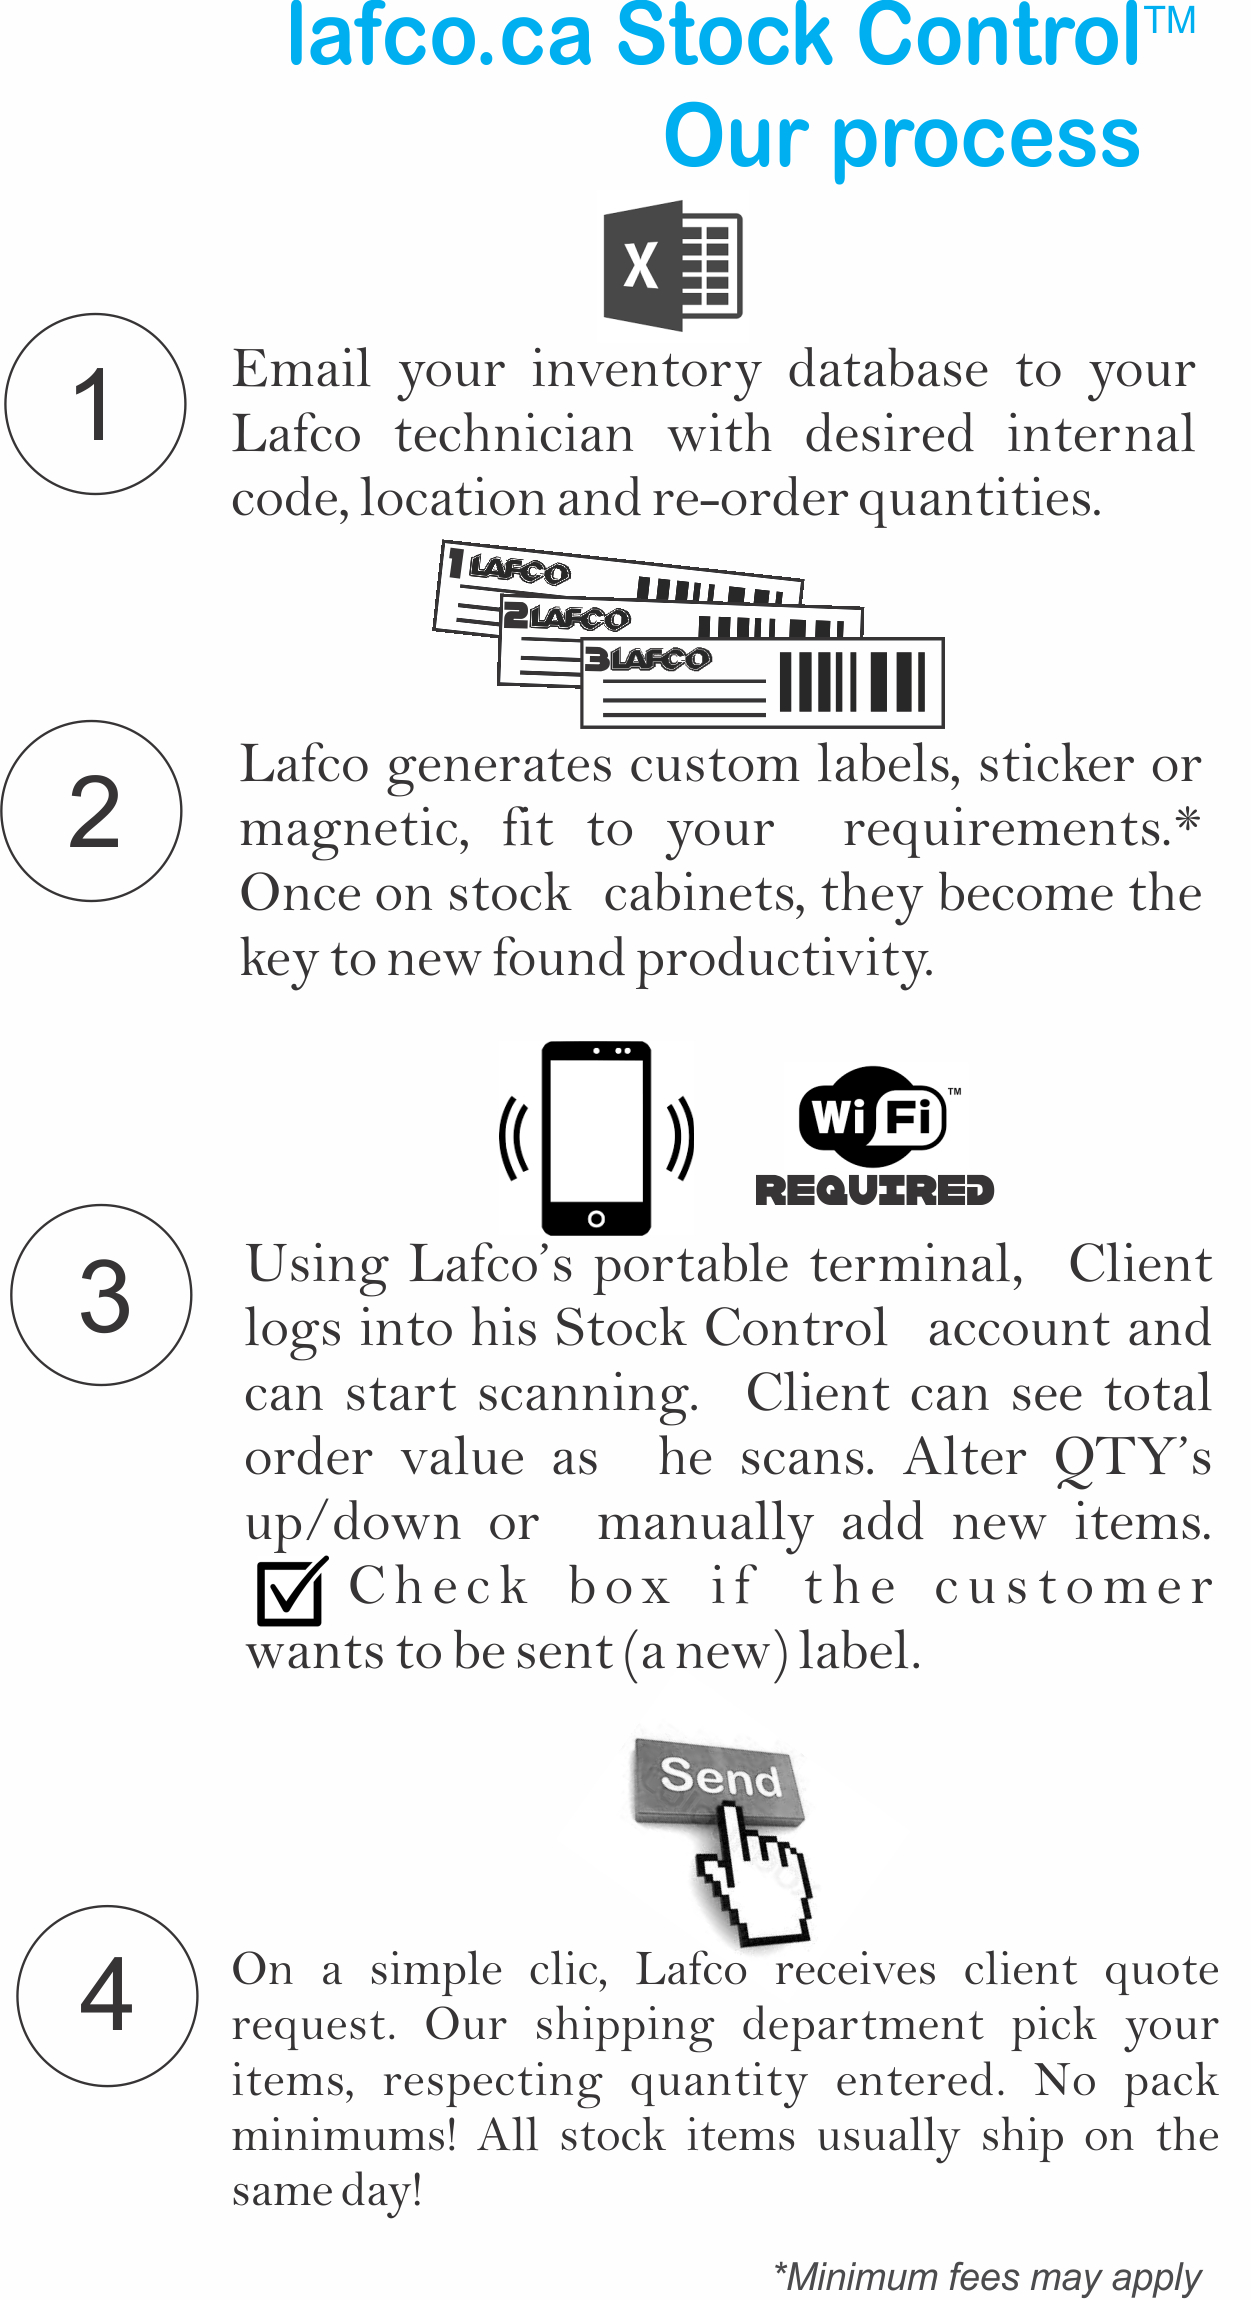 LAFCO STOCK CONTROL Our Process